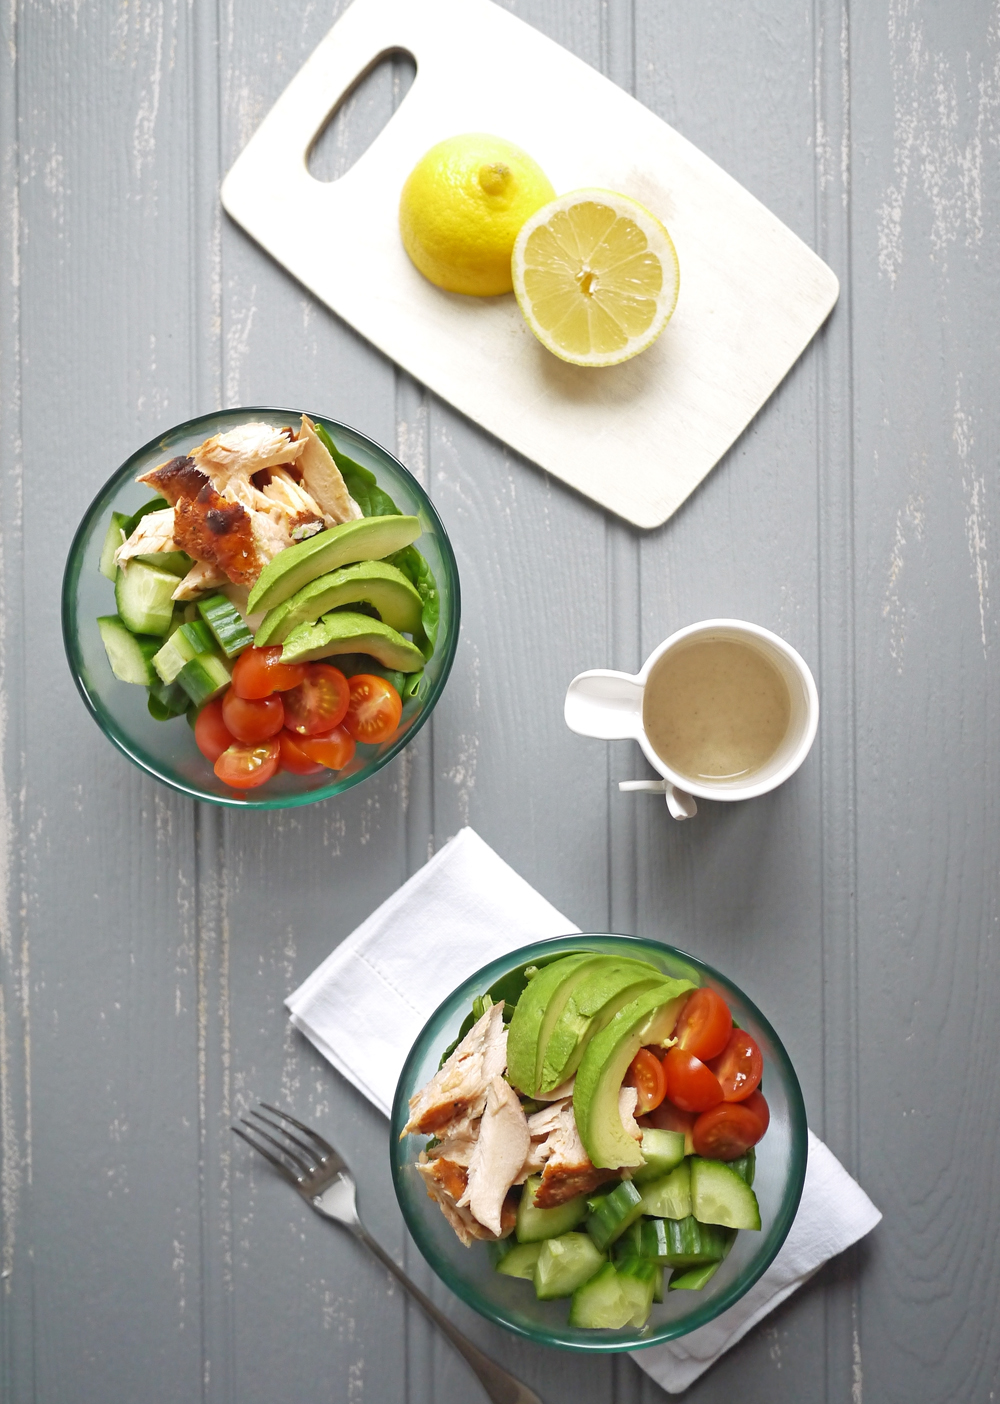 Simple Superfood Salad with an Awesome Tahini Dressing - Taming Twins